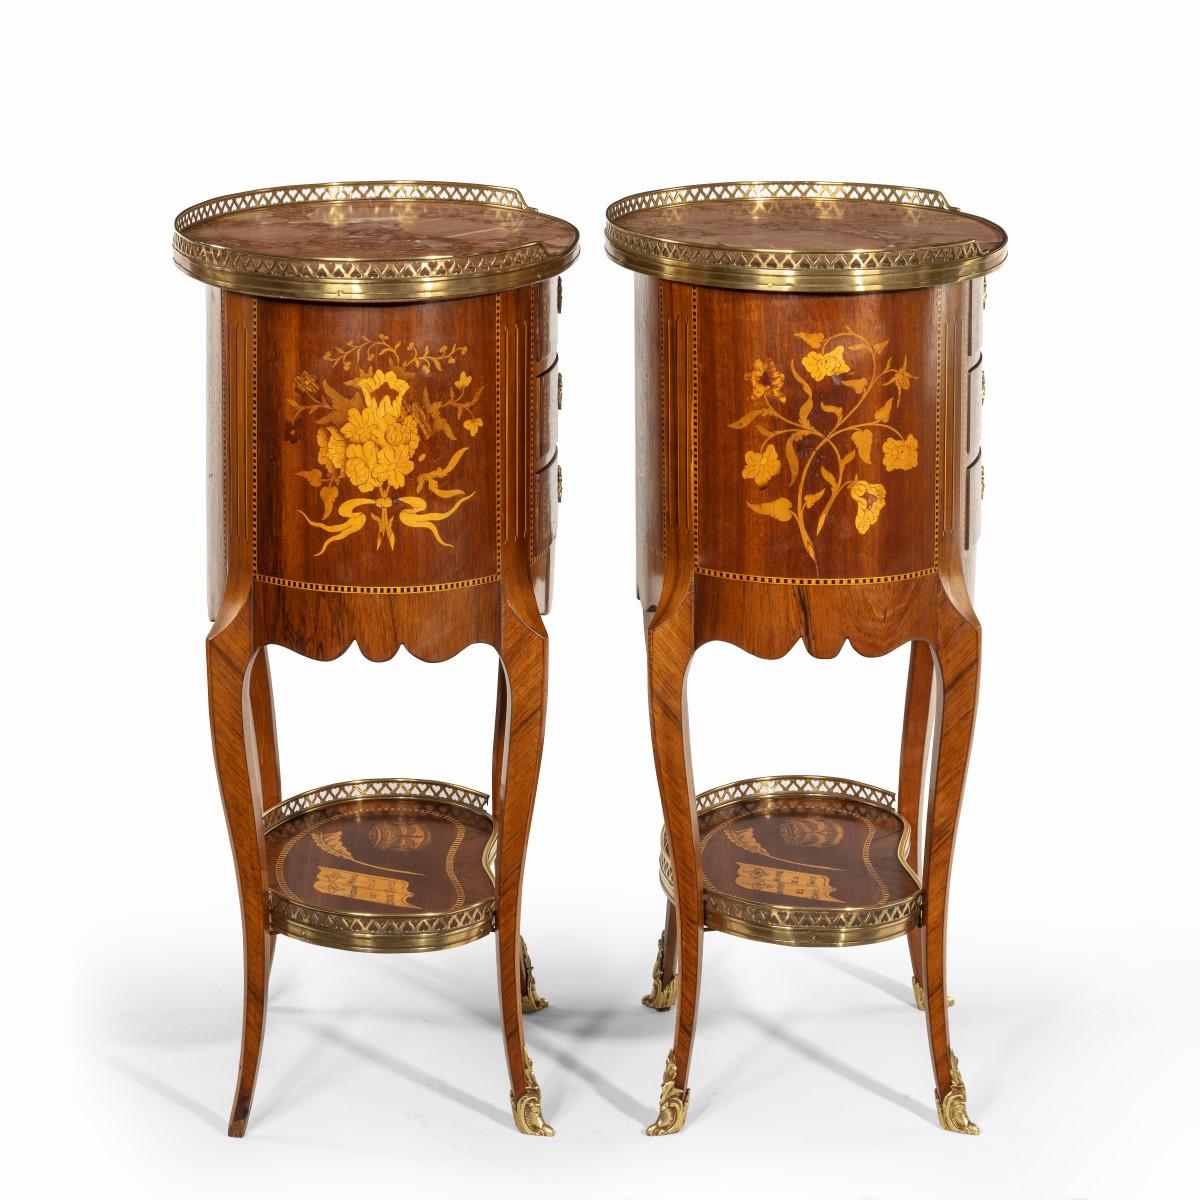 A pair of French rosewood oval marquetry bedside tables with marble tops, each of oval form with three small drawers set upon cabriole legs joined by a kidney-shaped shelf, decorated in boxwood and kingwood marquetry with oriental landscapes showing